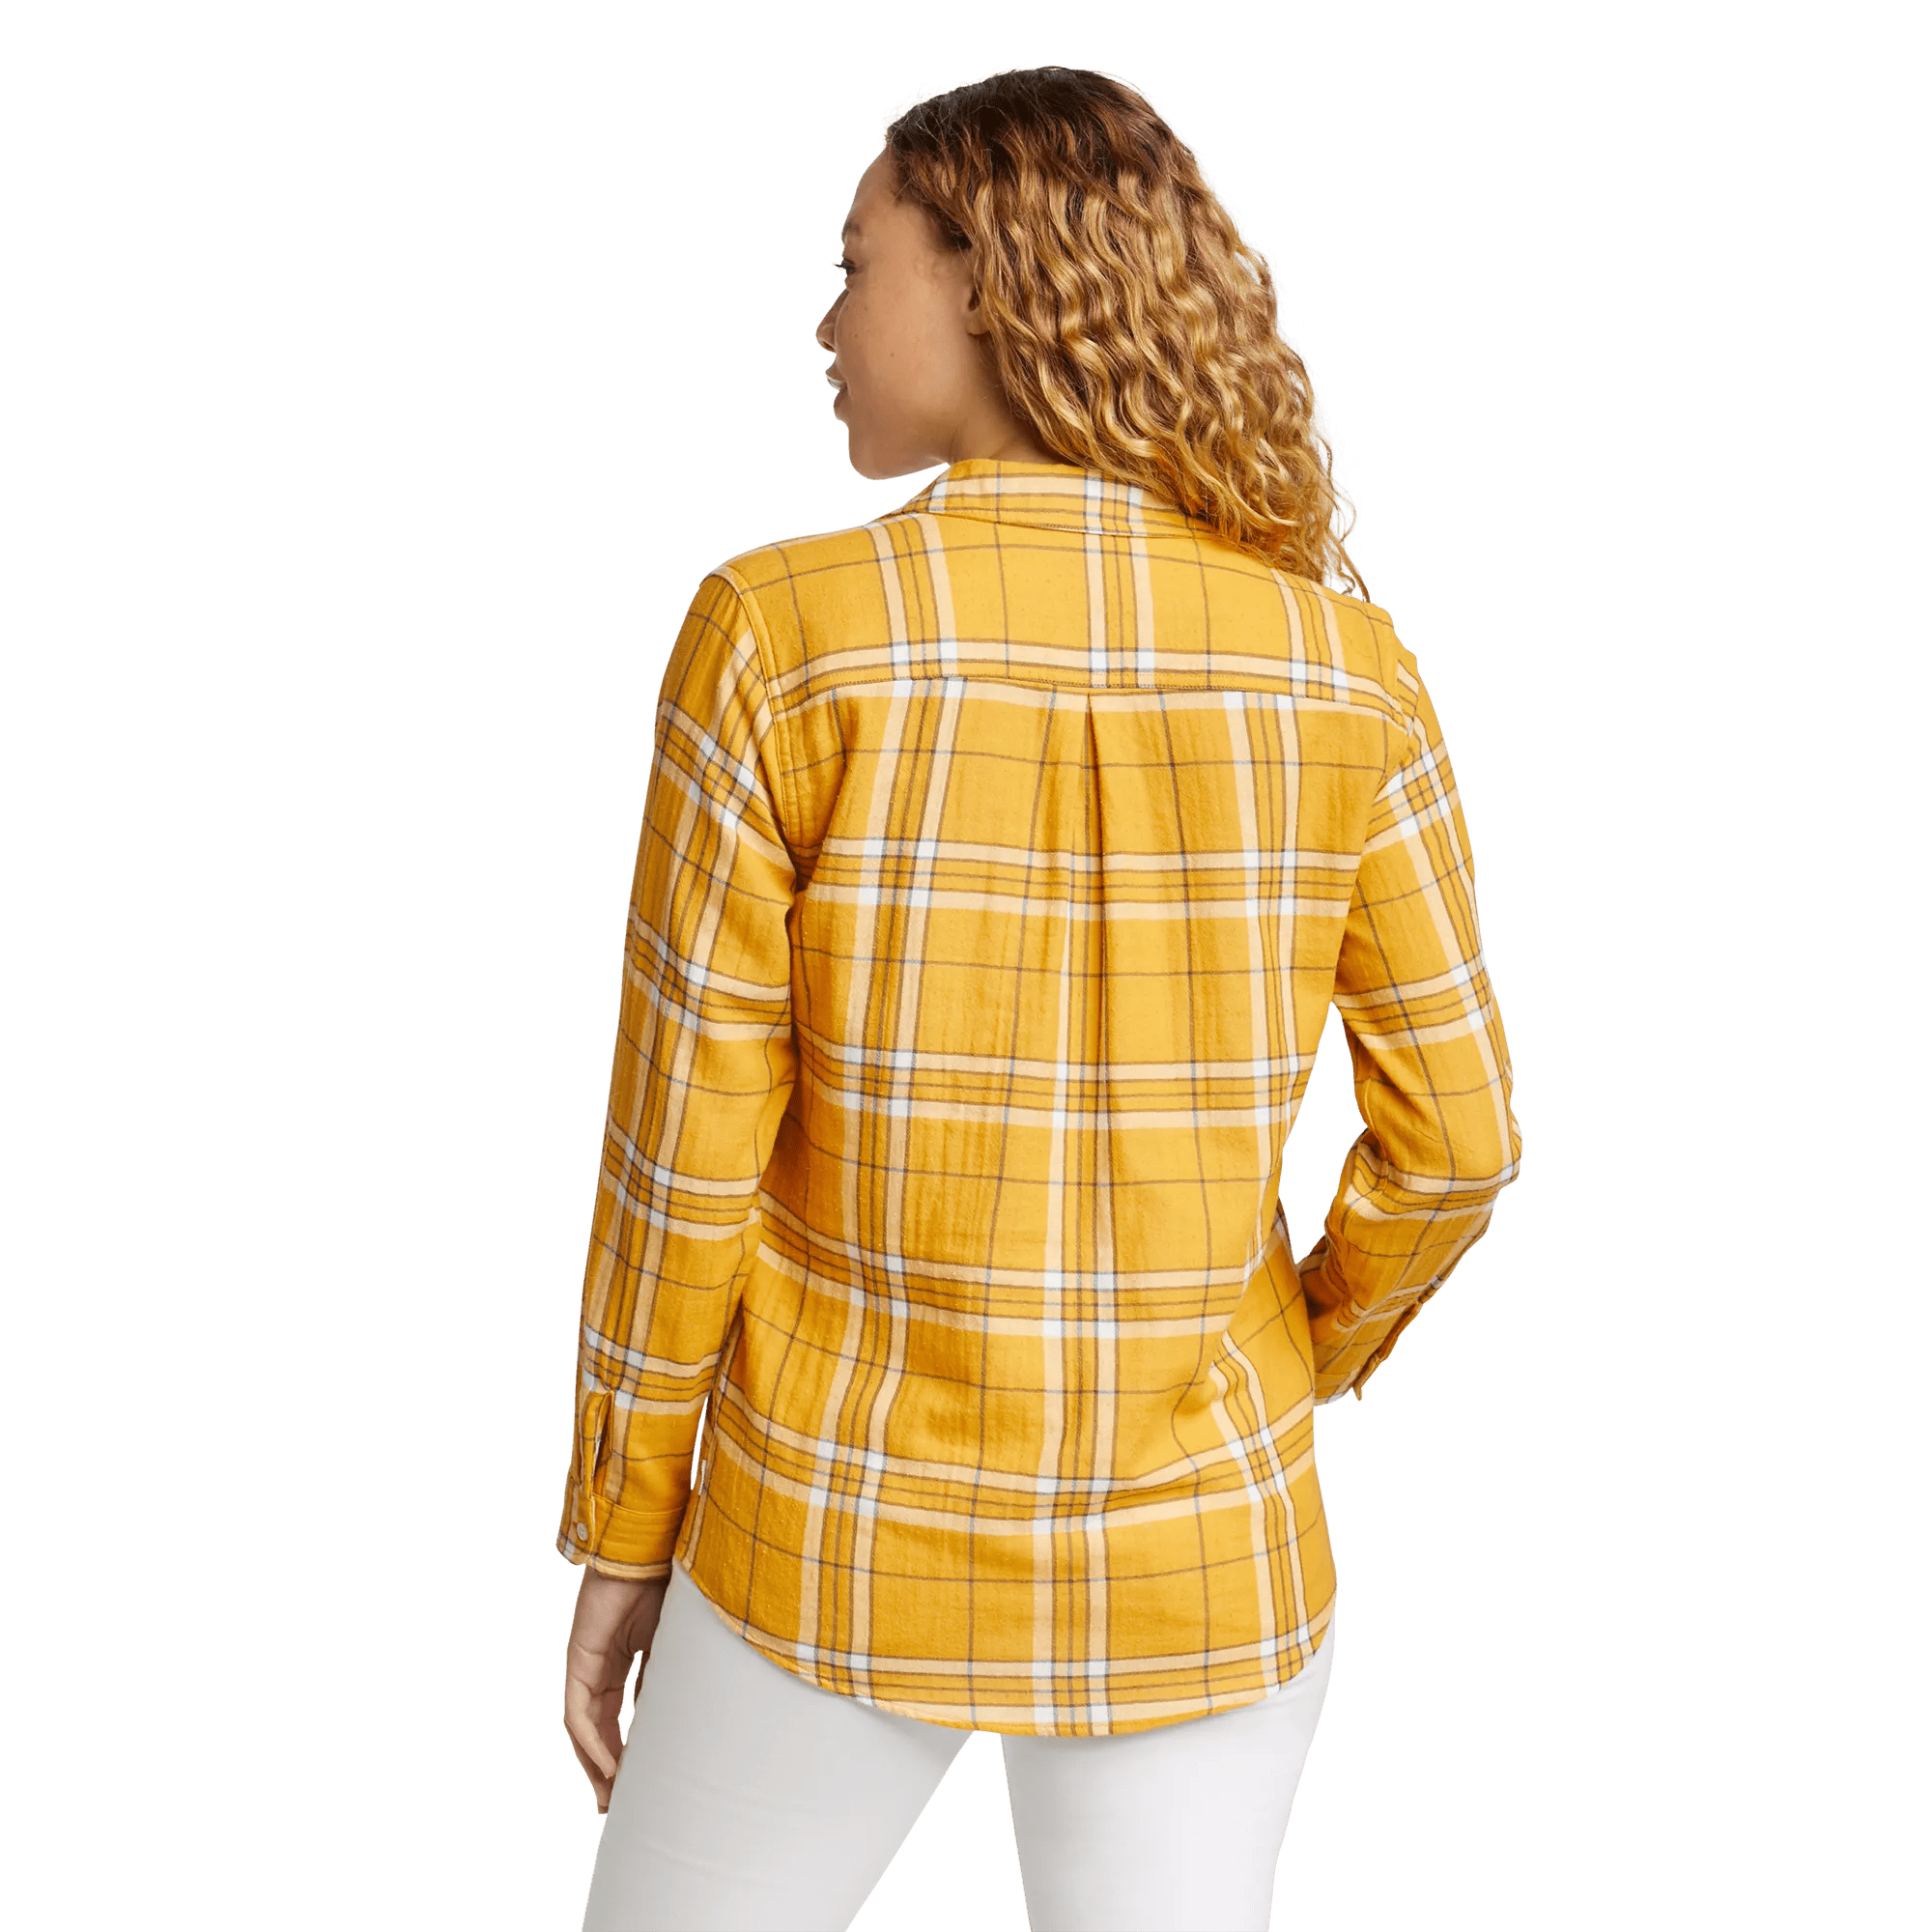 Carry-On Long-Sleeve Button-Down Shirt